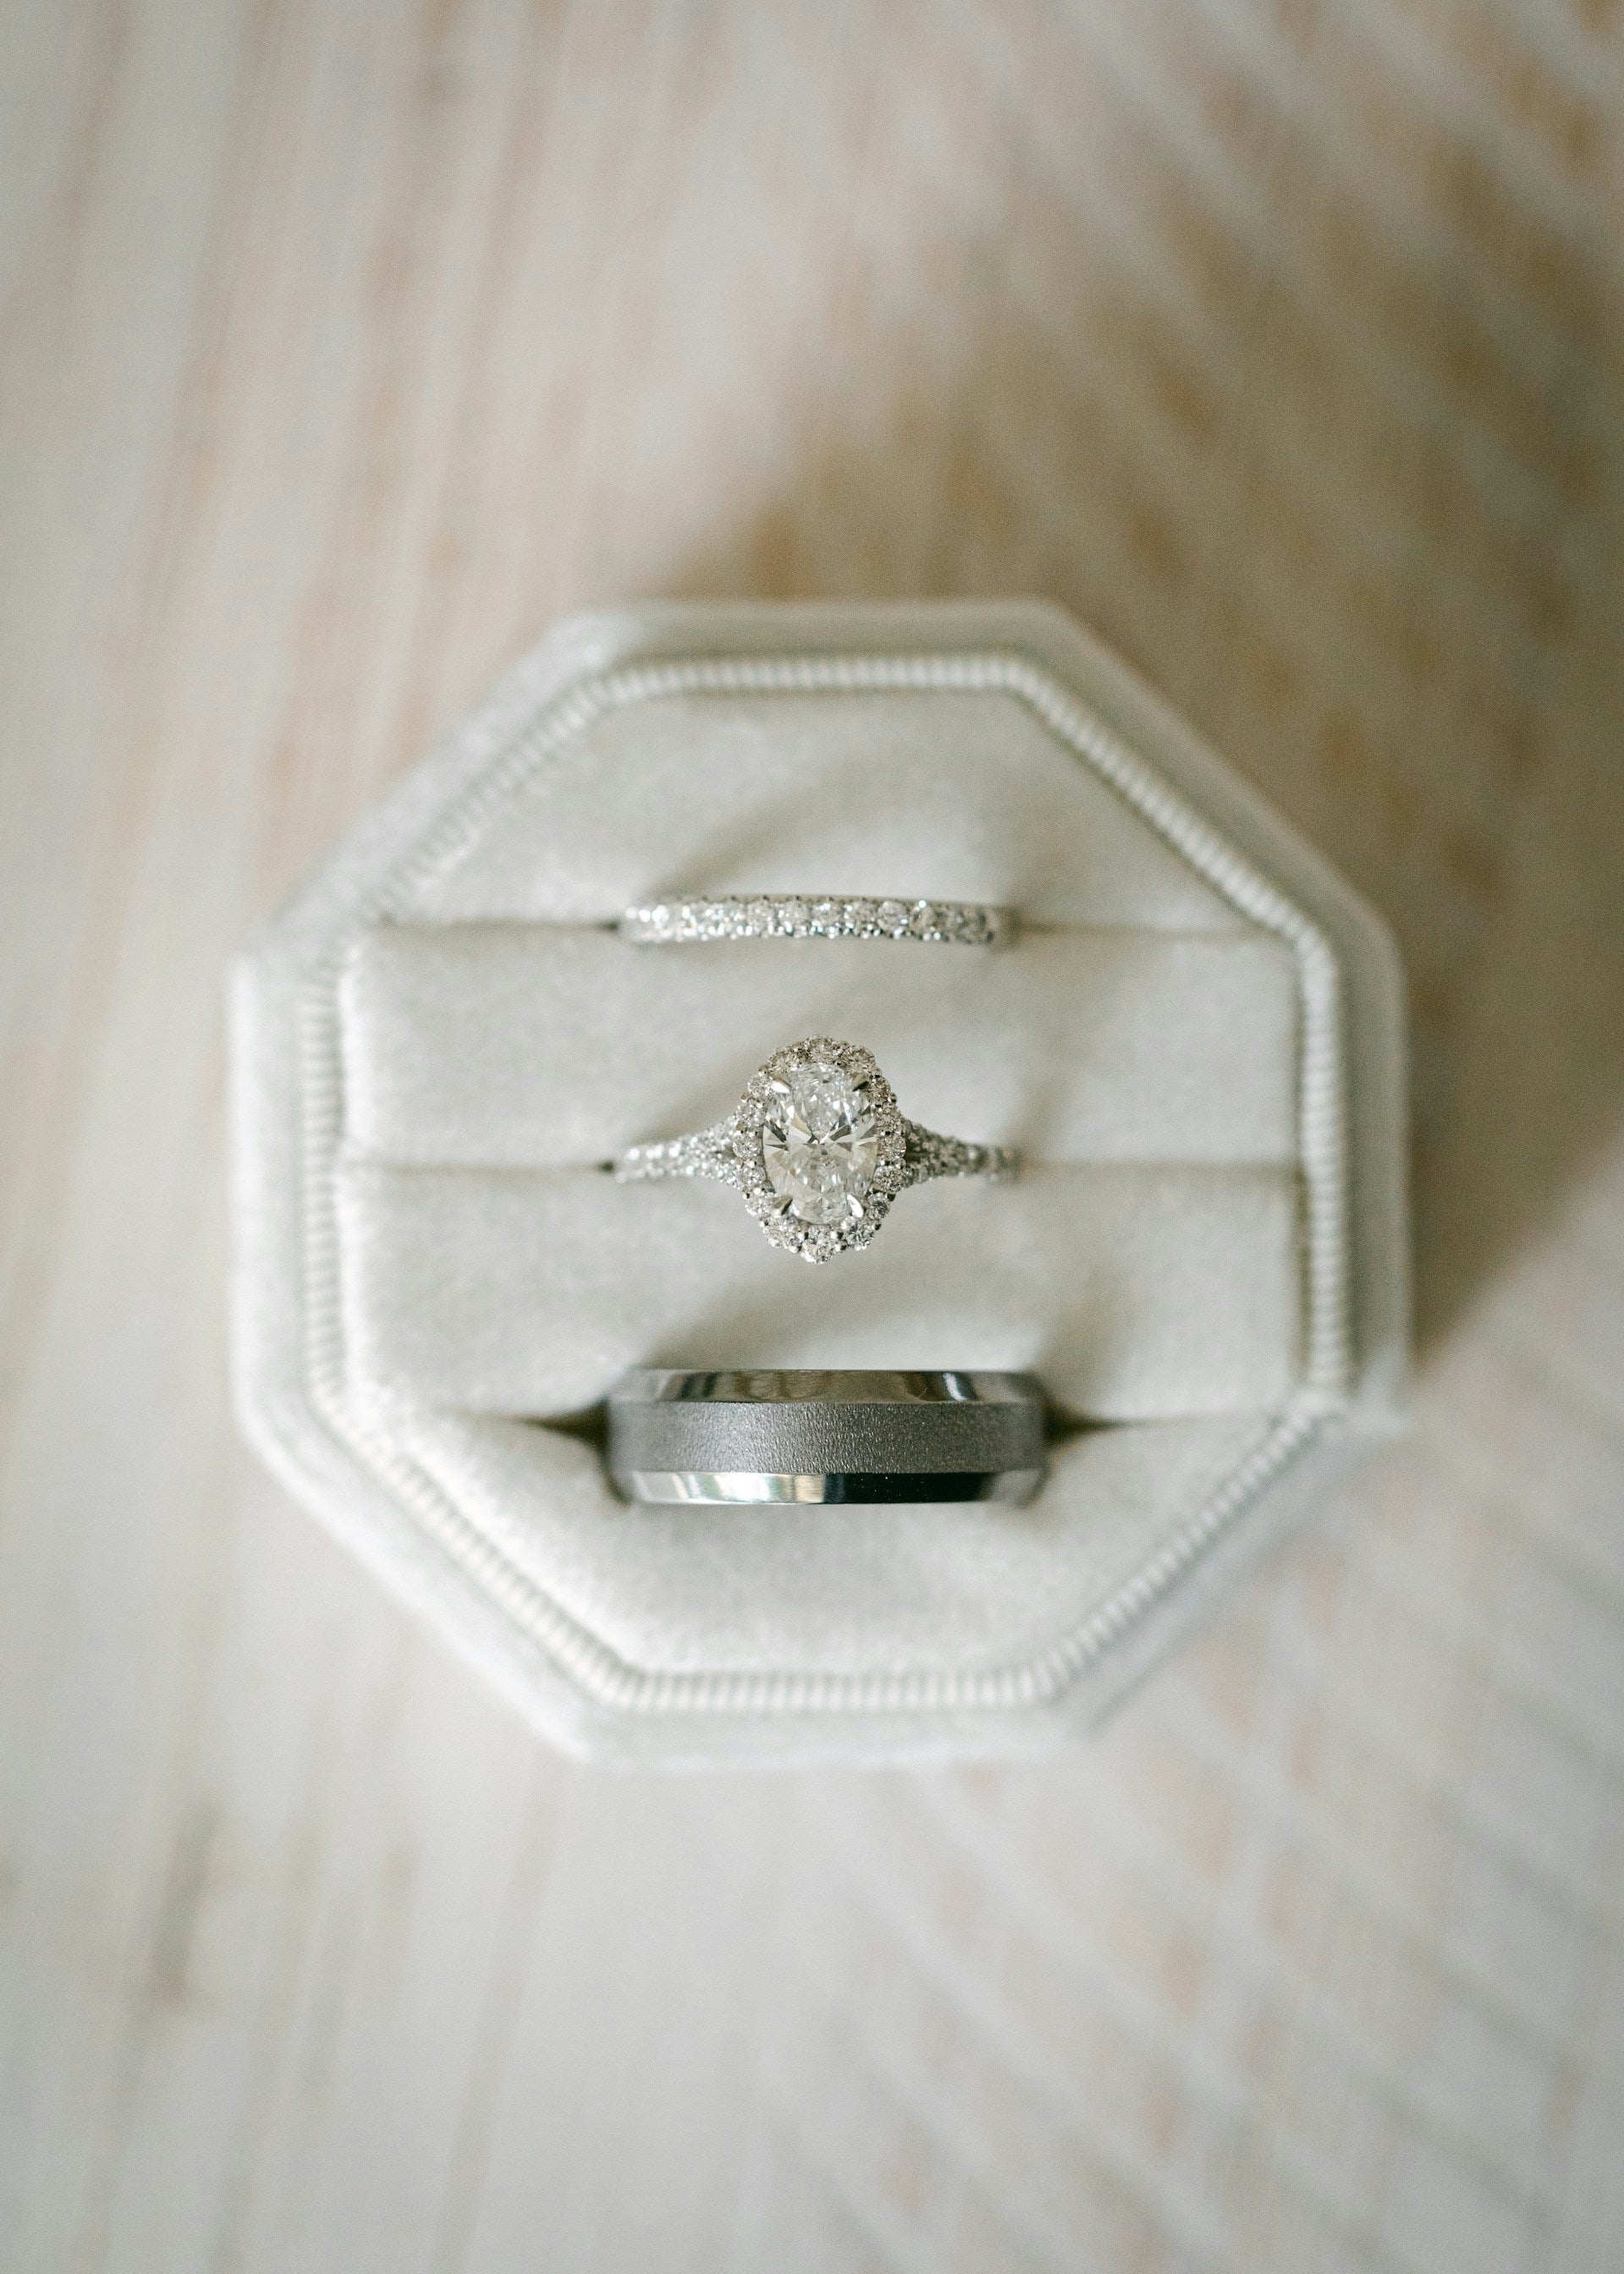 Oval Engagement Rings In Portland, ME